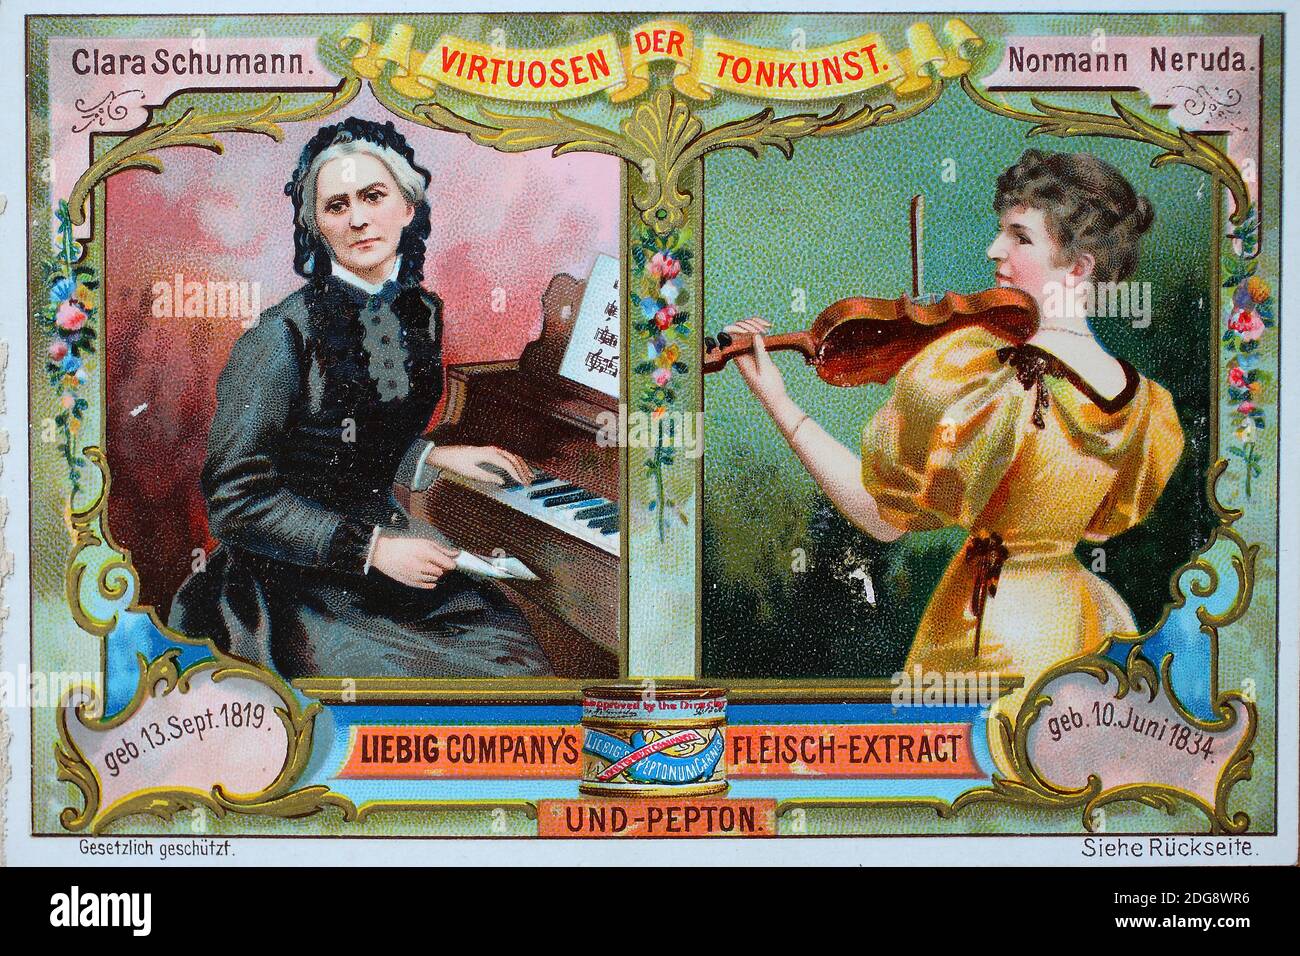 Picture series Virtuosos of the Art of Music, Clara Schumann and Normann Neruda  /  Bilderserie Virtuosen der Tonkunst, Clara Schumann und Normann Neruda, Liebigbild, digital improved reproduction of a collectible image from the Liebig company, estimated from 1900, pd  /  digital verbesserte Reproduktion eines Sammelbildes von ca 1900, gemeinfrei, Stock Photo